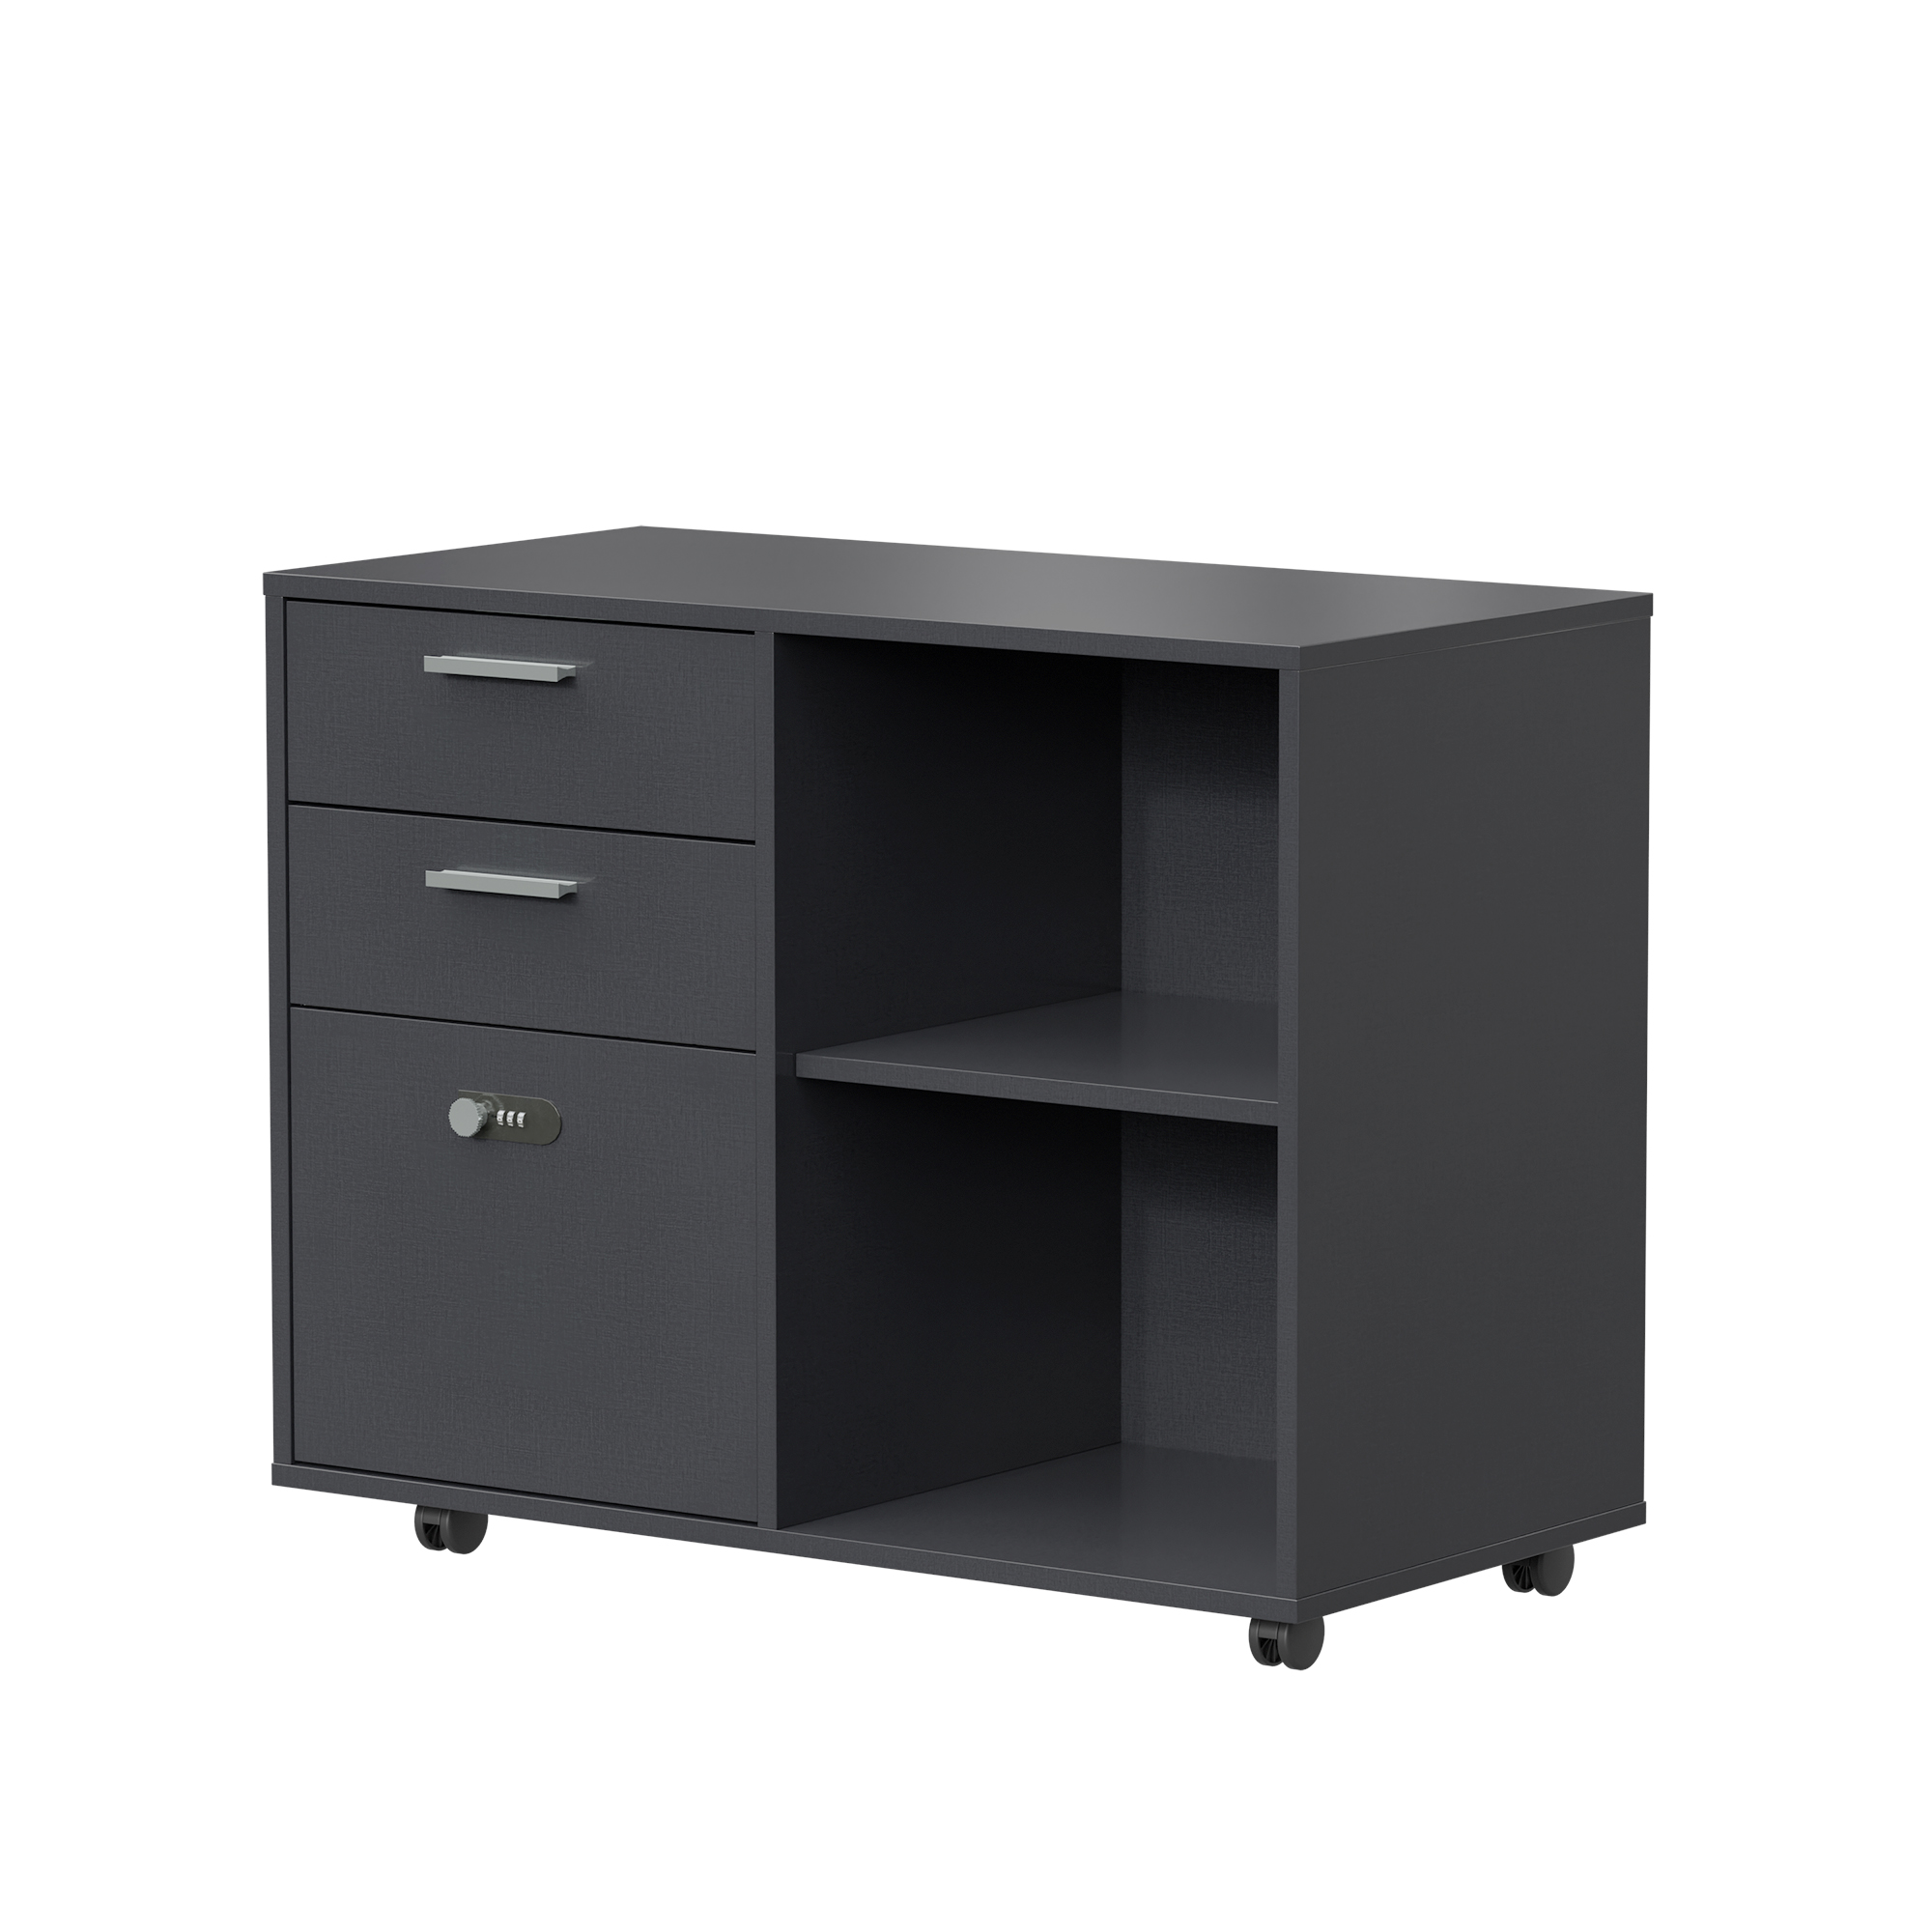 Wooden Home Office Pulley Movable File Cabinets with Password Lock, File Cabinet with Open Storage Shelves and Two Drawers, Low cabinet with 5 Universal Wheels, Easy to Assemble, Dark Gray - image 1 of 7